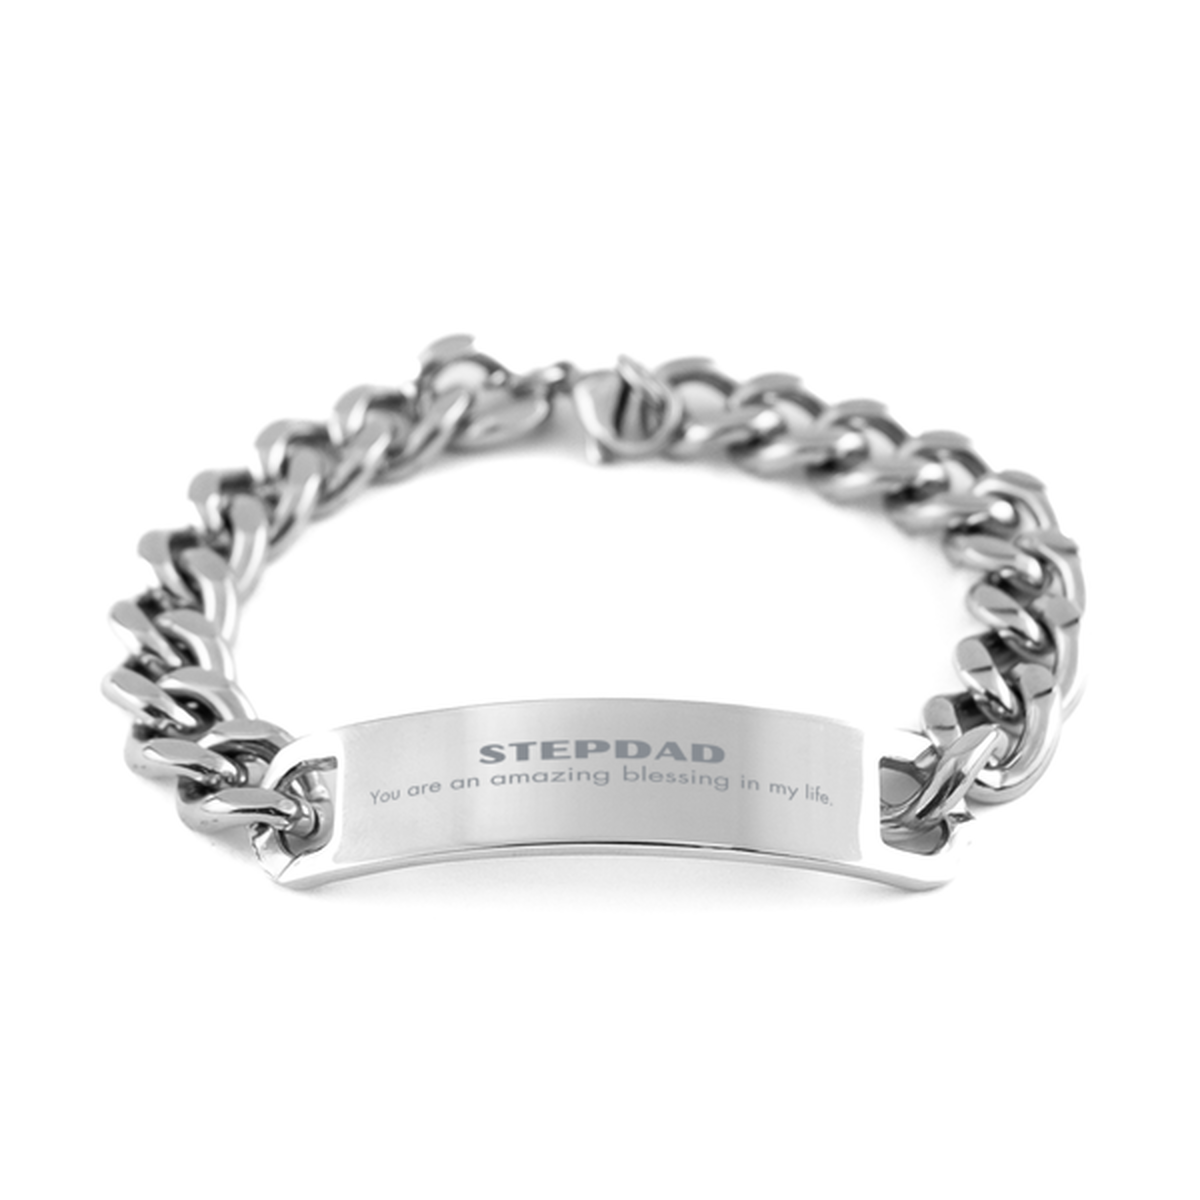 Stepdad Cuban Chain Stainless Steel Bracelet, You are an amazing blessing in my life, Thank You Gifts For Stepdad, Inspirational Birthday Christmas Unique Gifts For Stepdad